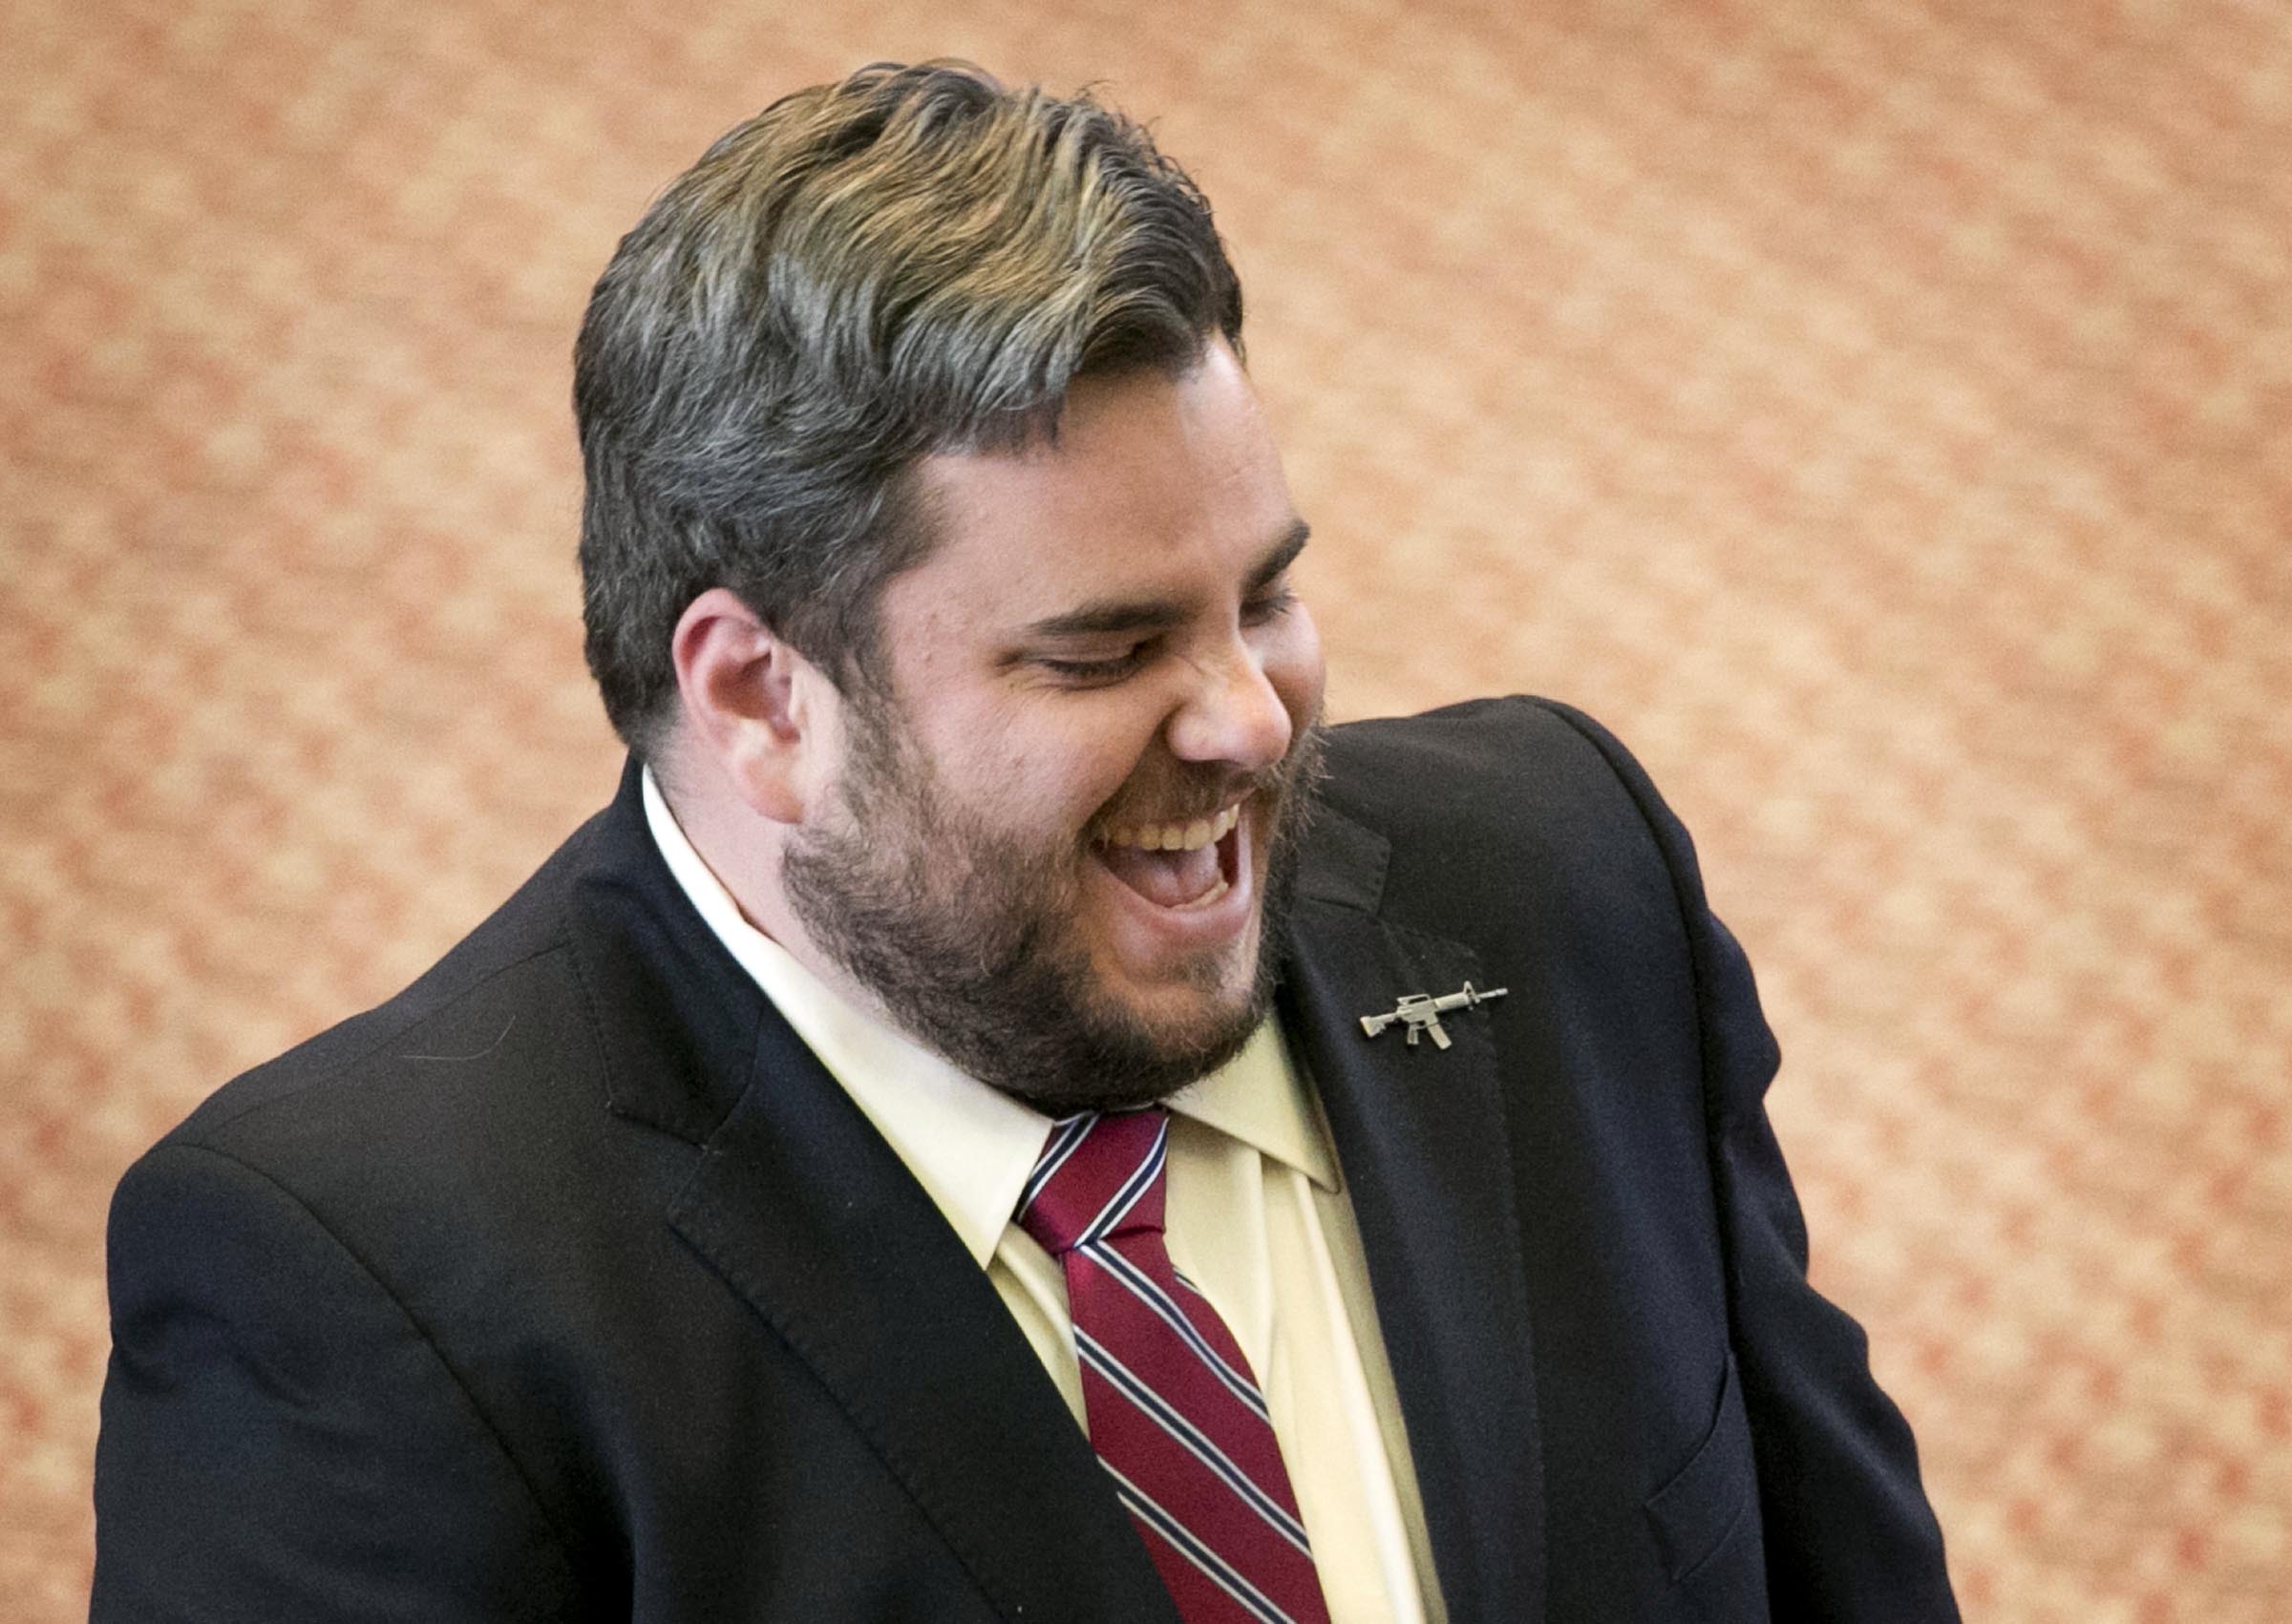 Jonathan Stickland, a white man with a light beard and mustache, wearing a suit with a striped red tie, laughs in a candid portrait photo.